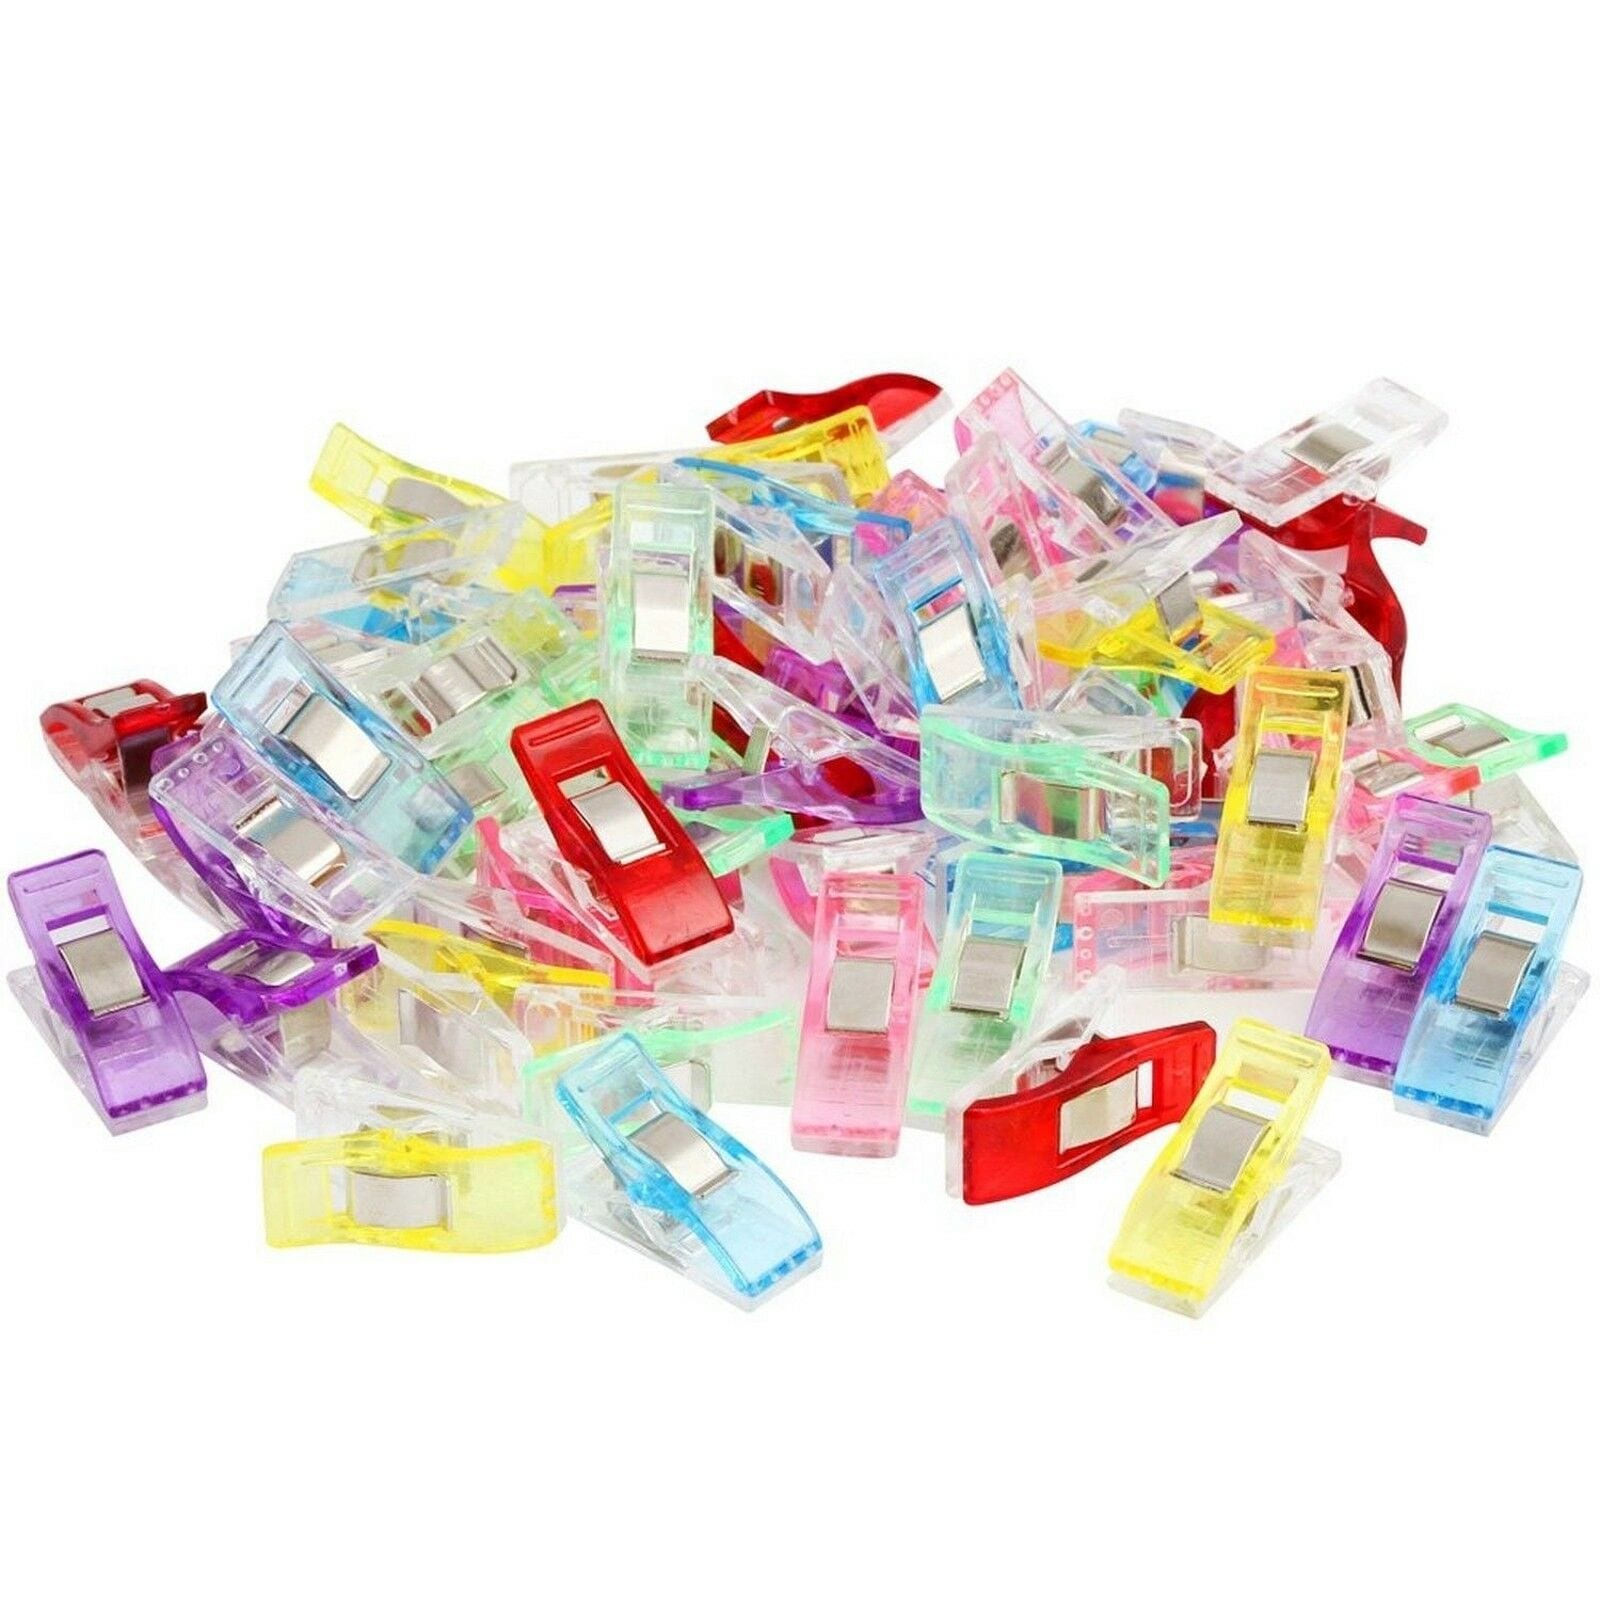 Clover Wonder Clipsmulti-color Sewing Clips Small Craft 